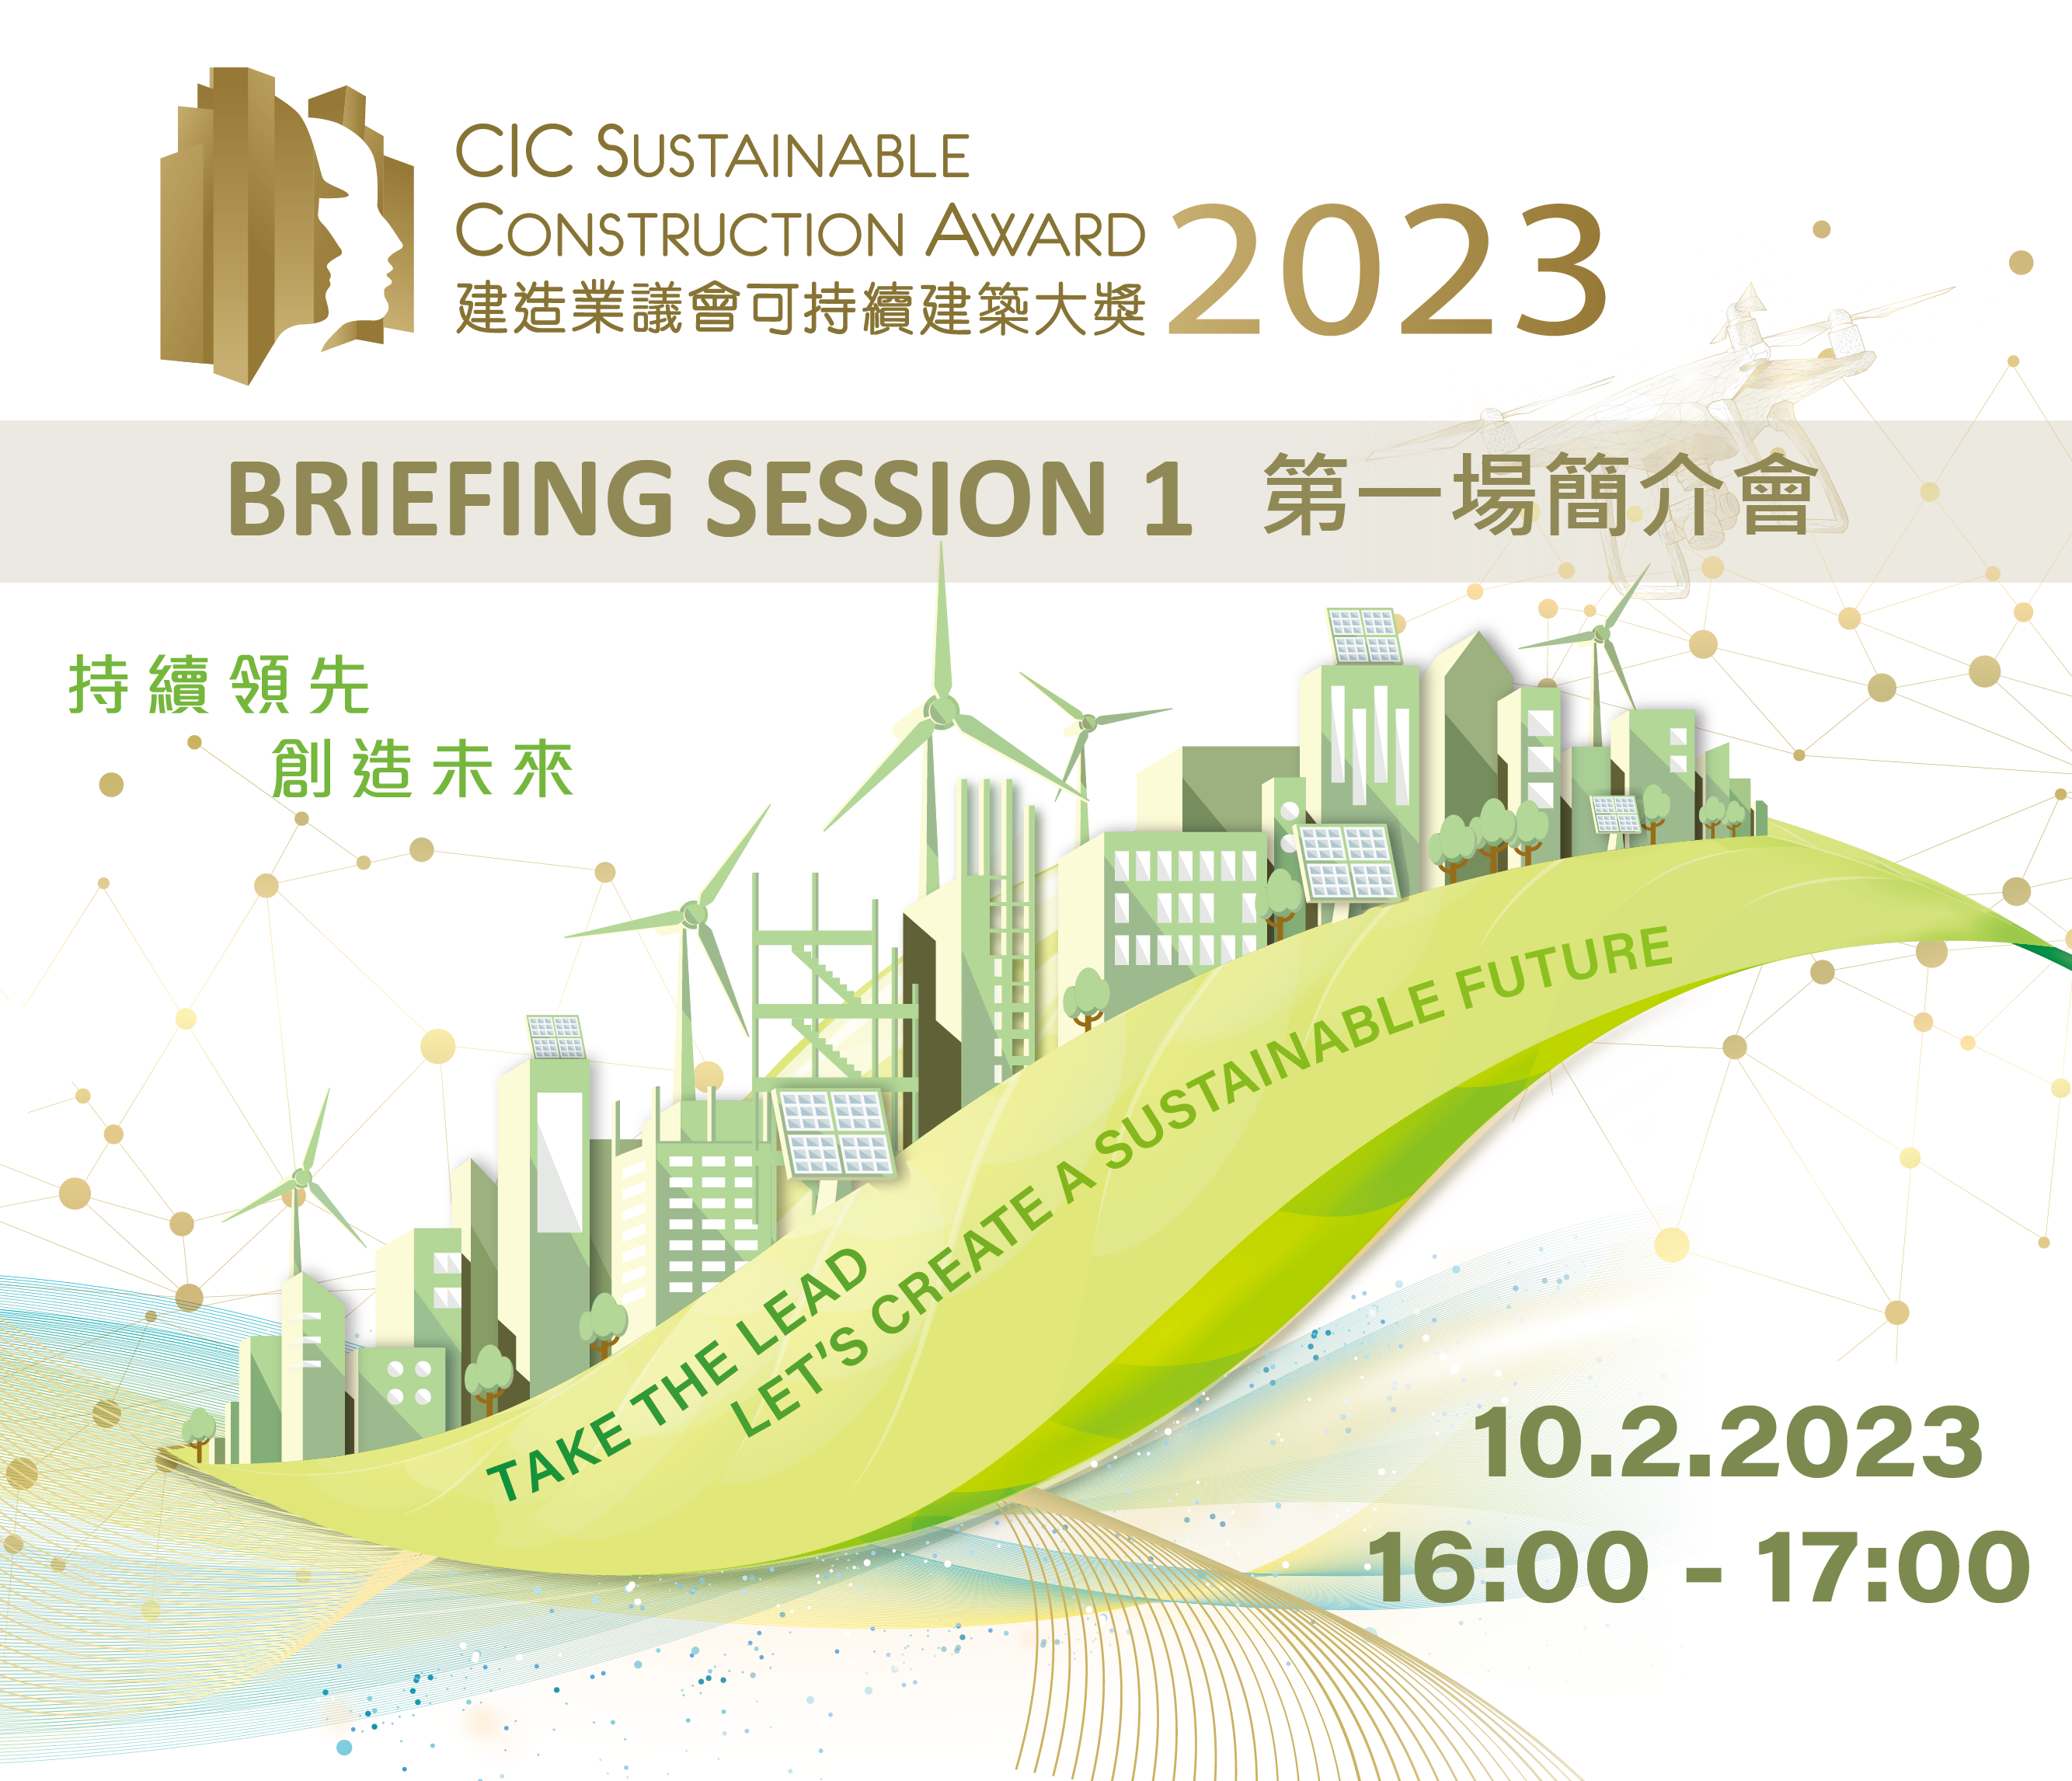 CIC Sustainable Construction Award (SCA) 2023 Briefing Session